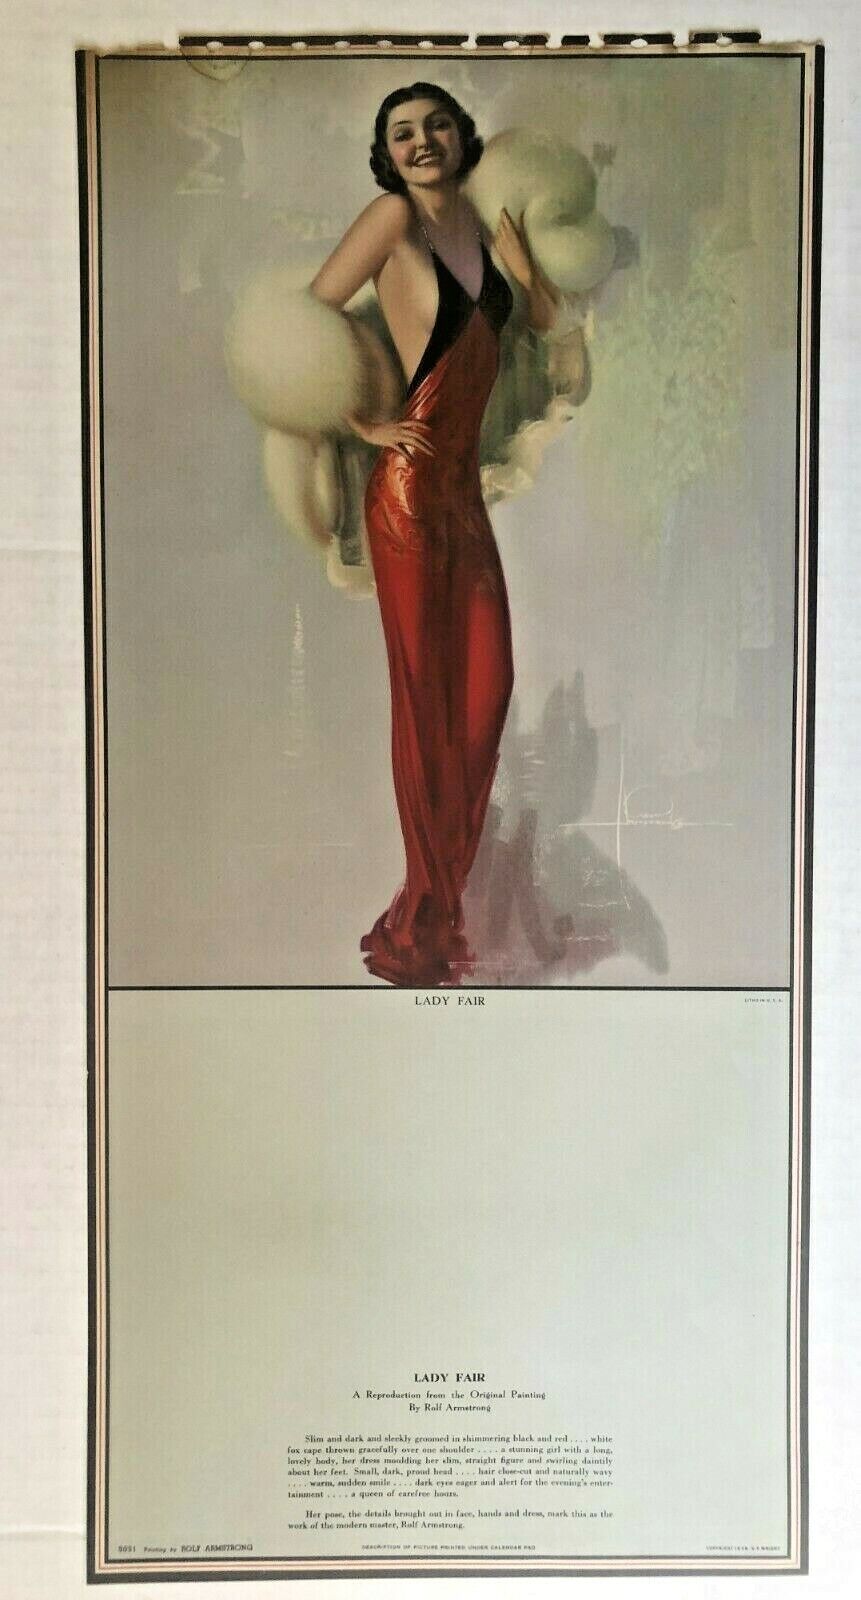 Beautiful 1938 Pinup Girl Picture by Rolf Armstrong - Lady Fair Brunette in Red